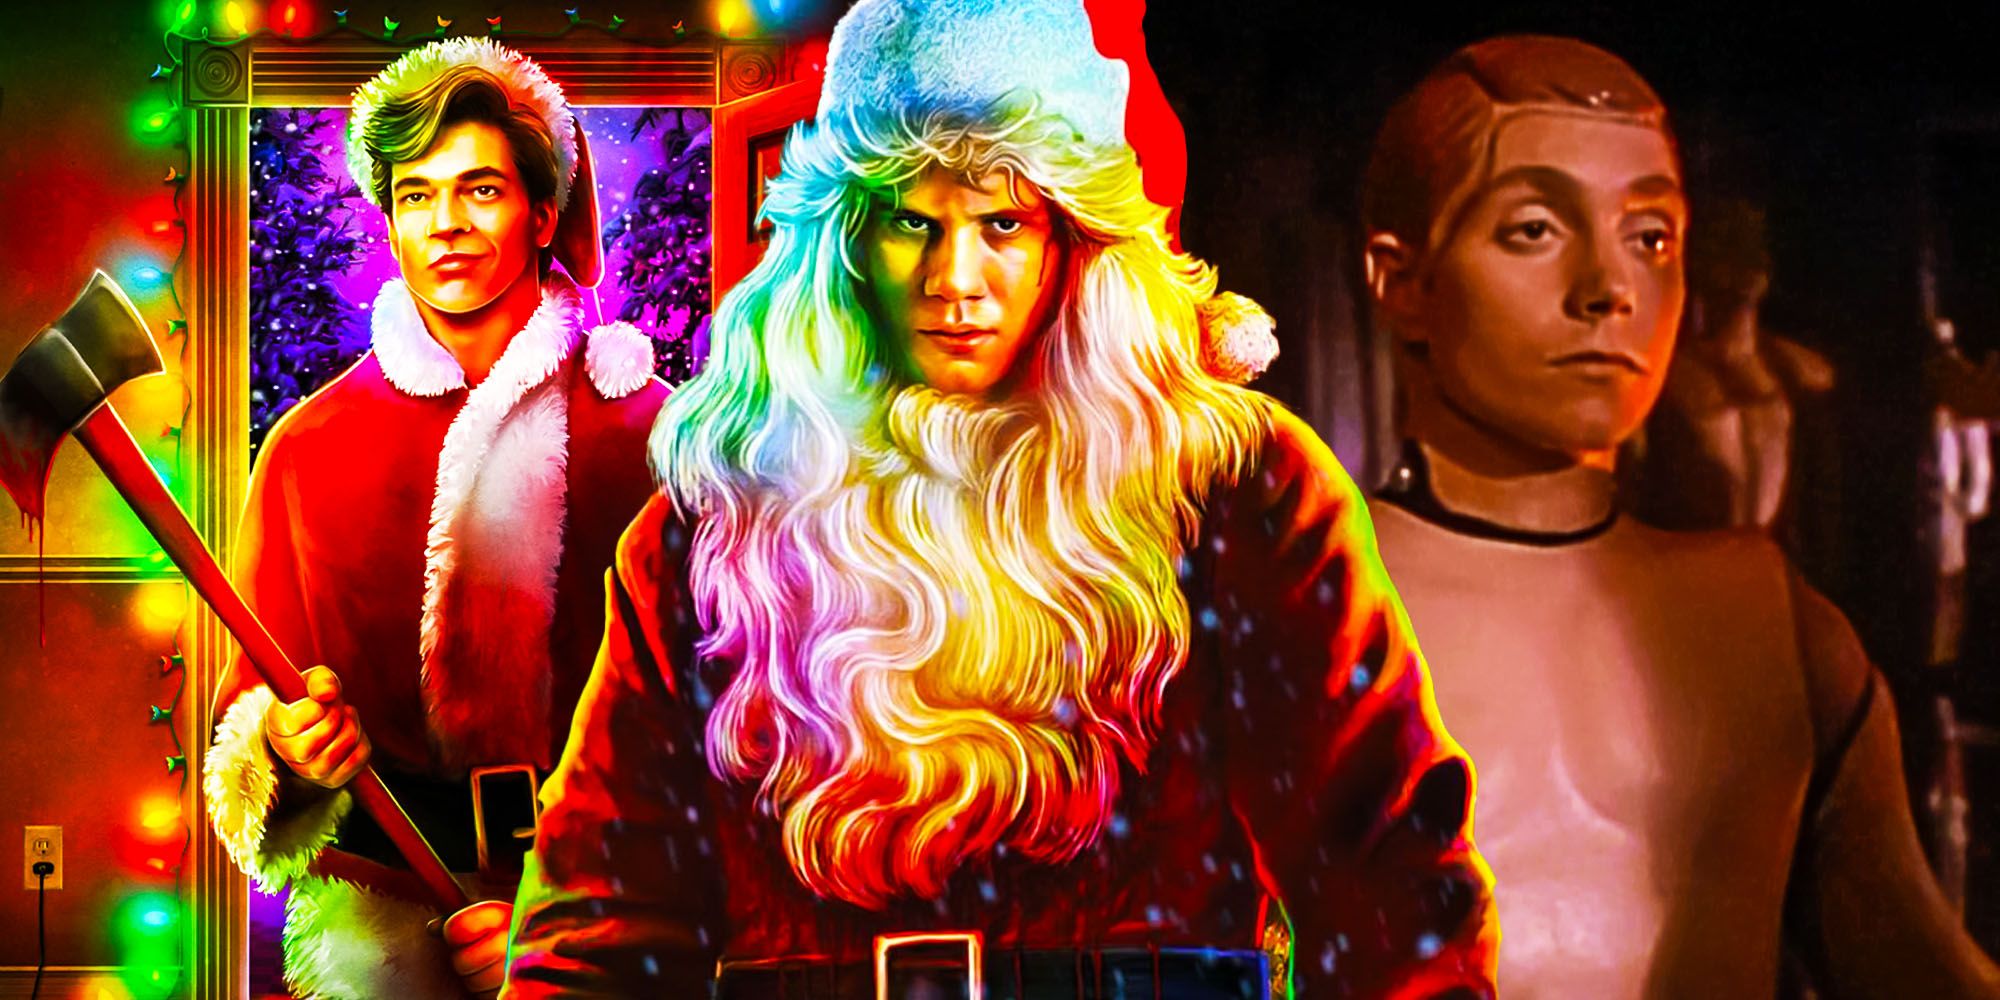 silent night deadly night movies ranked